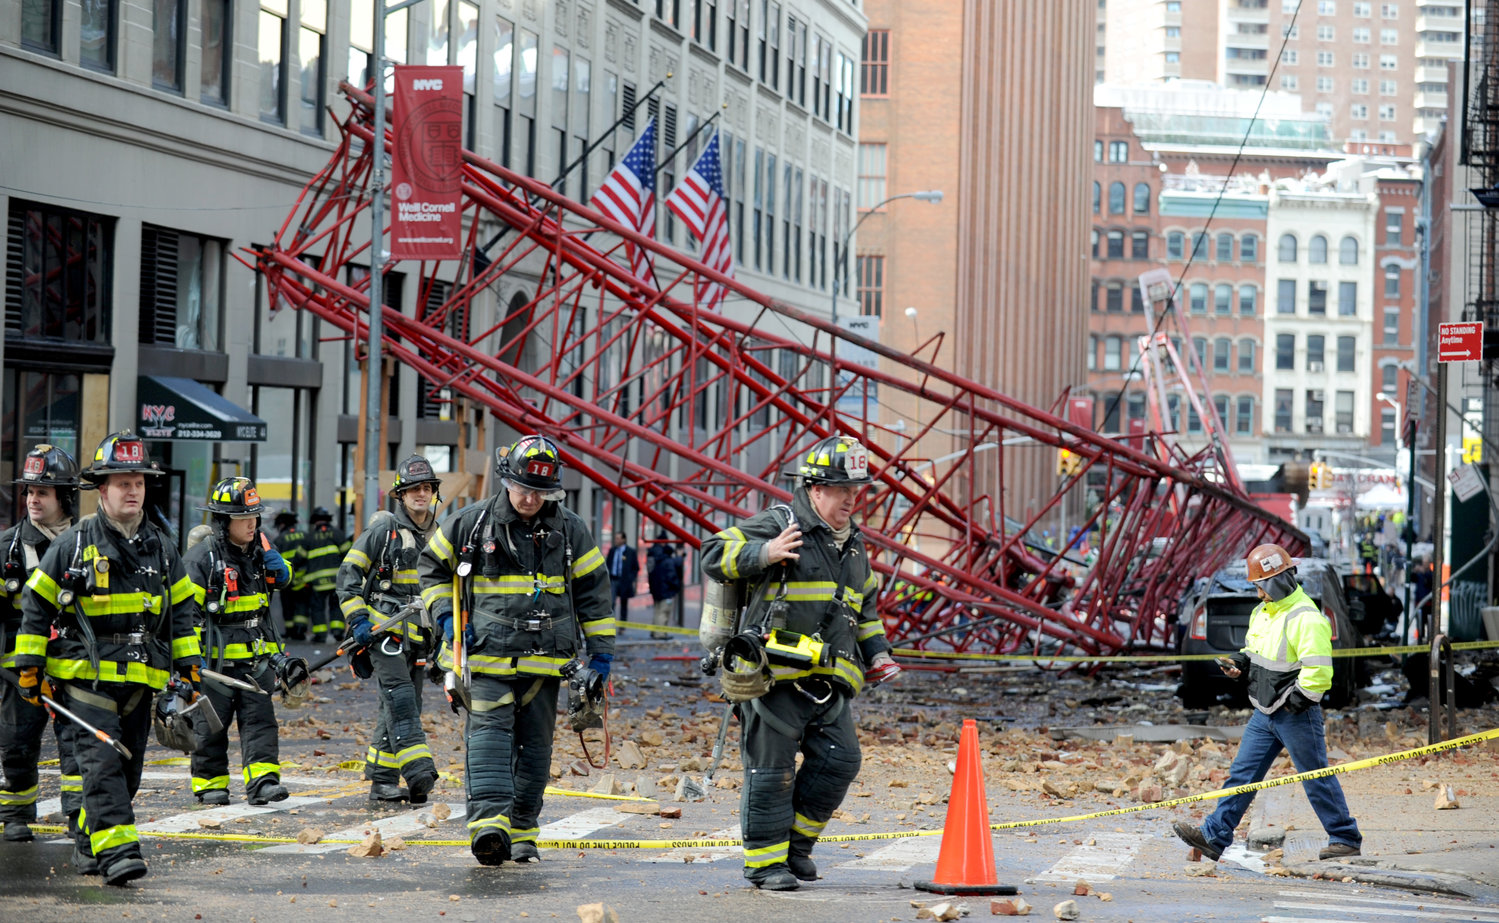 The aftermath of a toppled construction crane on Worth Street in Tribeca in February 2016. One person was killed and two others injured